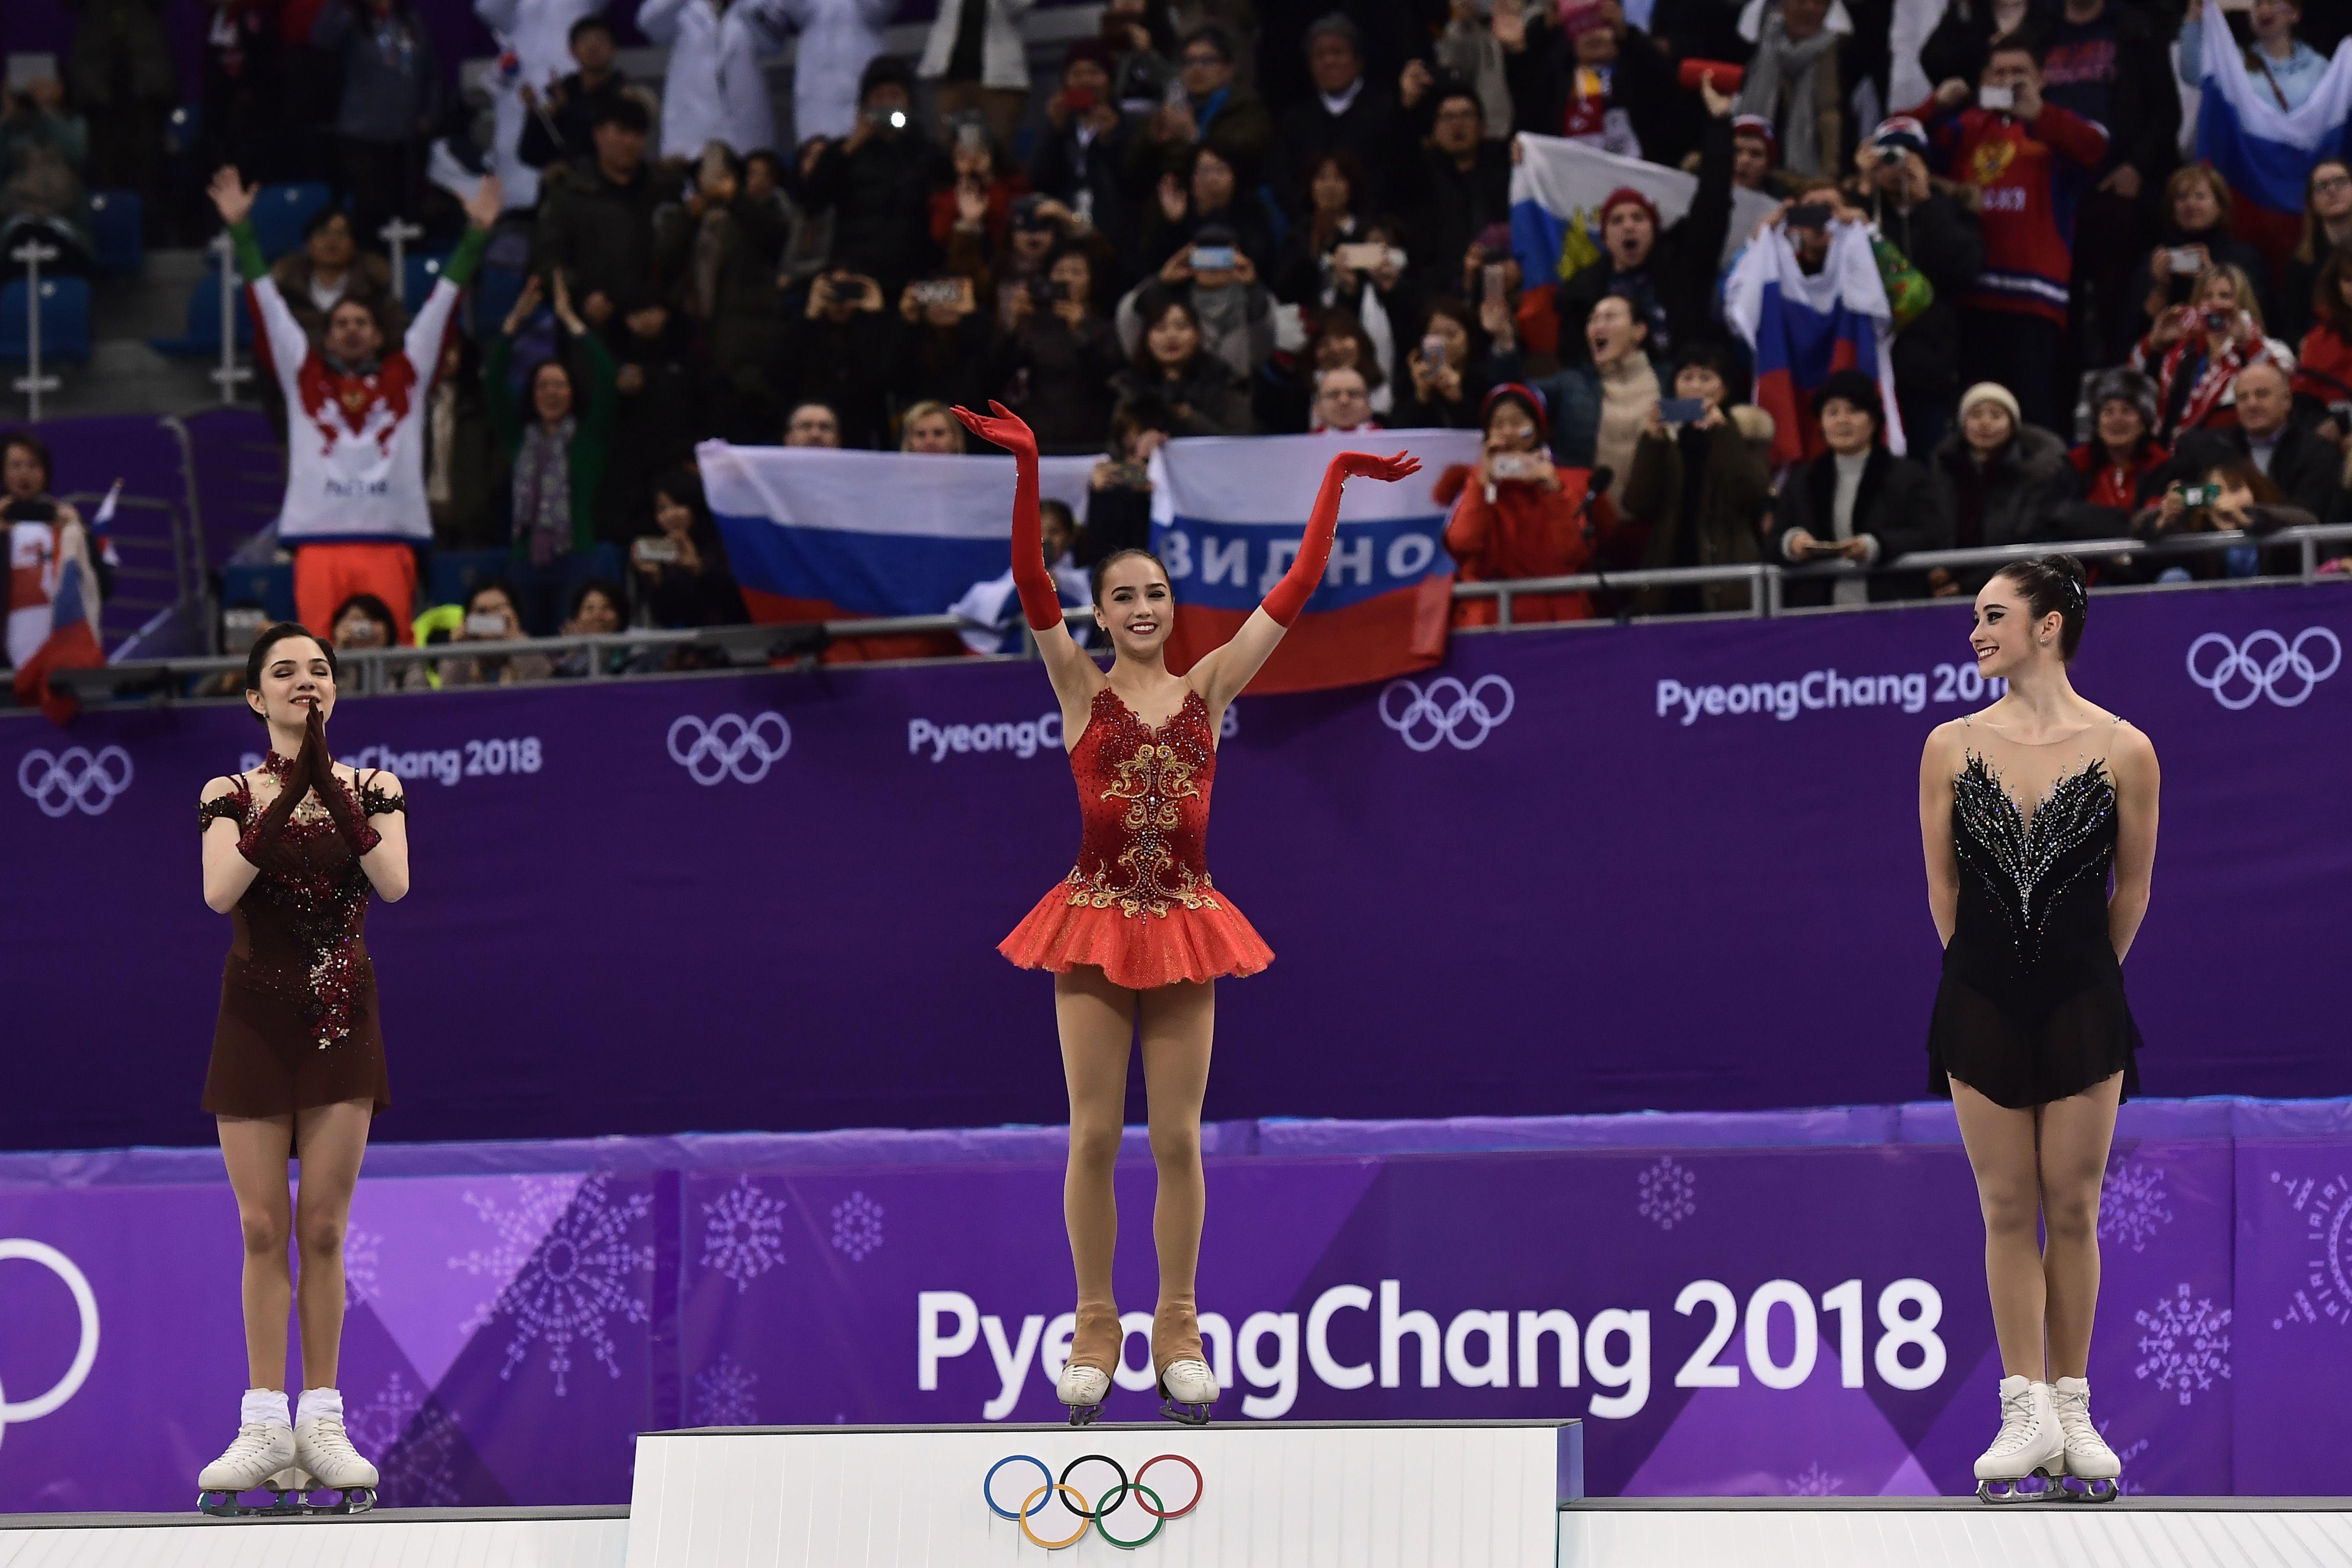 (L-R) Silver medallist Russia's Evgenia Medvedeva, gold medallist Russia's Alina Zagitova and bronze medallist Canada's Kaetlyn Osmond celebrate on the podium during the venue ceremony after the women's single skating free skating of the figure skating event during the Pyeongchang 2018 Winter Olympic Games at the Gangneung Ice Arena in Gangneung on February 23, 2018. / AFP PHOTO / ARIS MESSINIS        (Photo credit should read ARIS MESSINIS/AFP/Getty Images)